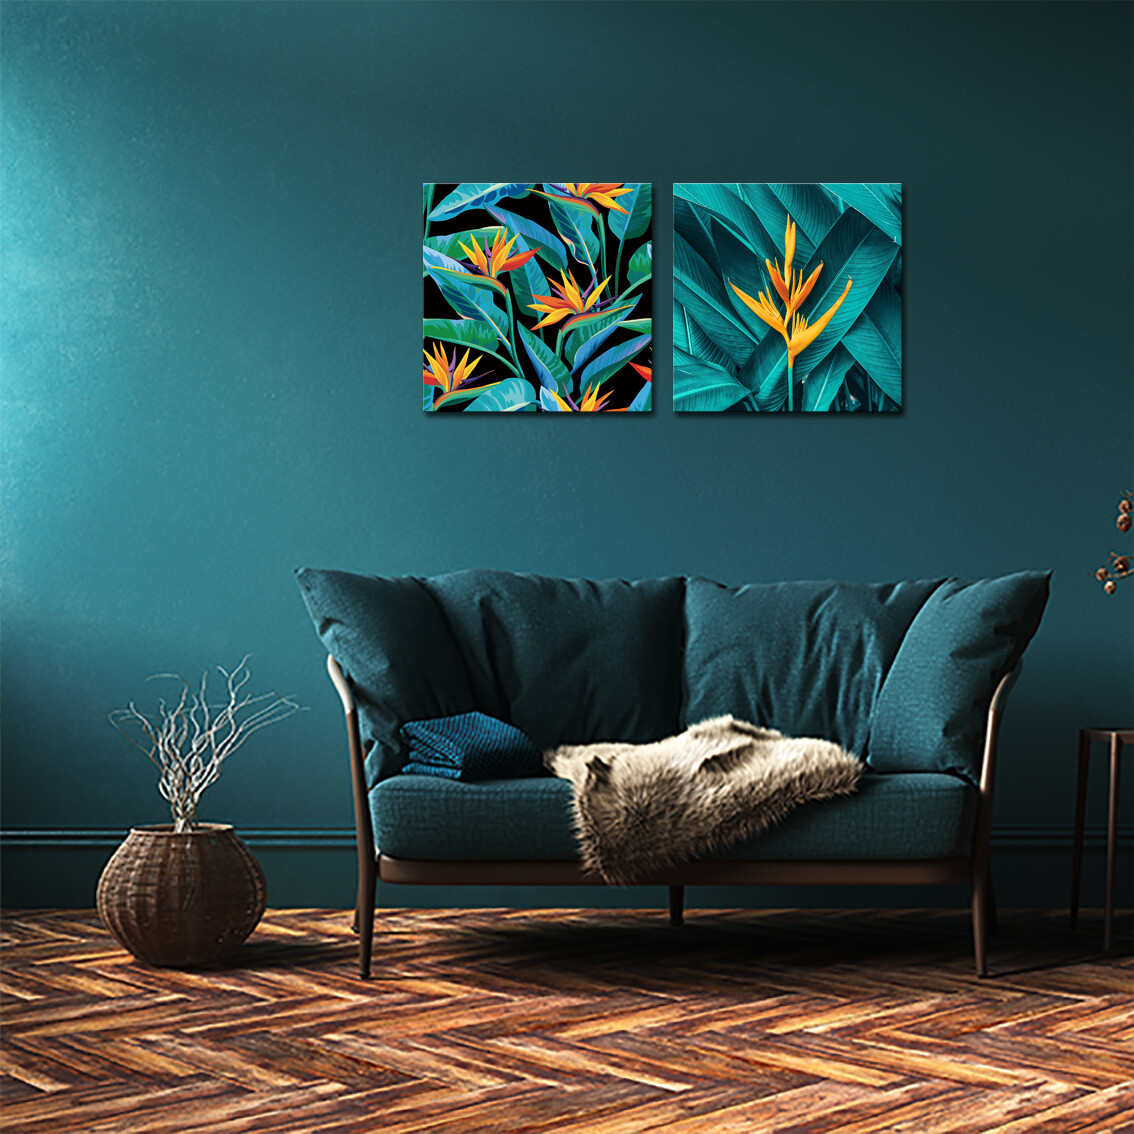 Jungle Leaves - Modern Luxury Wall art Printed on Acrylic Glass - Frameless and Ready to Hang